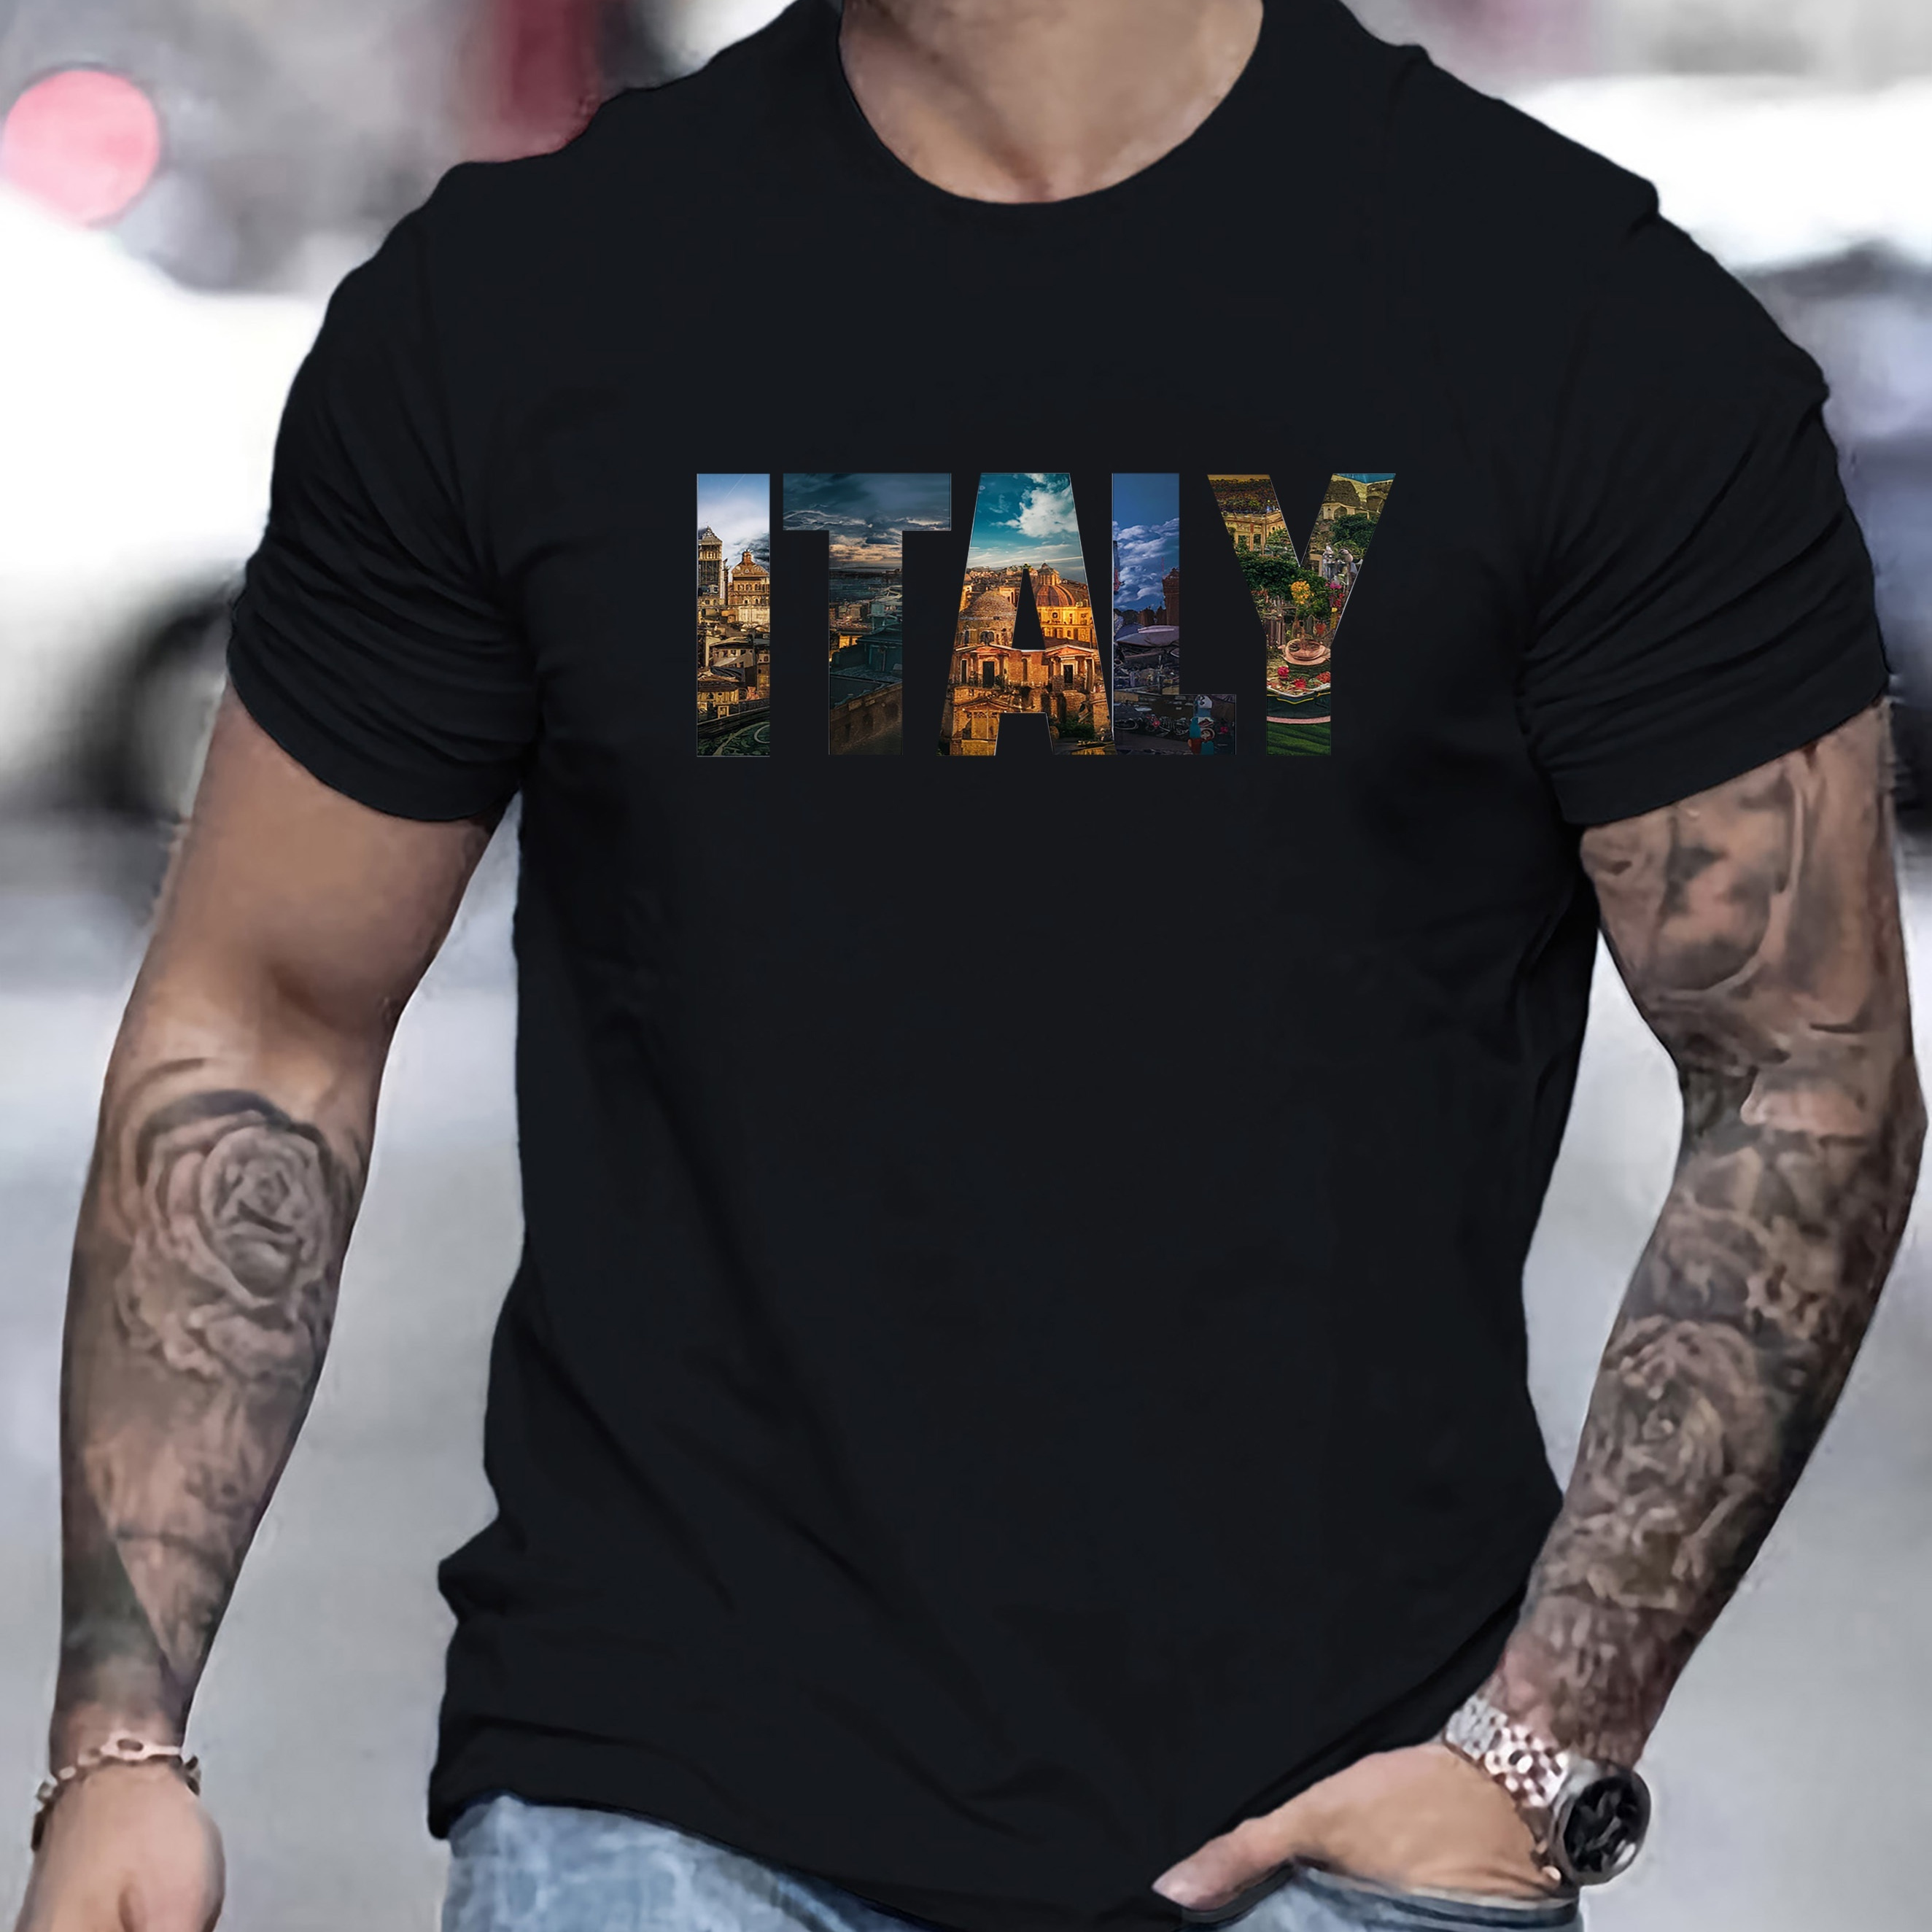 

Italy Graphic Men's Short Sleeve T-shirt, Comfy Stretchy Trendy Tees For Summer, Casual Daily Style Fashion Clothing